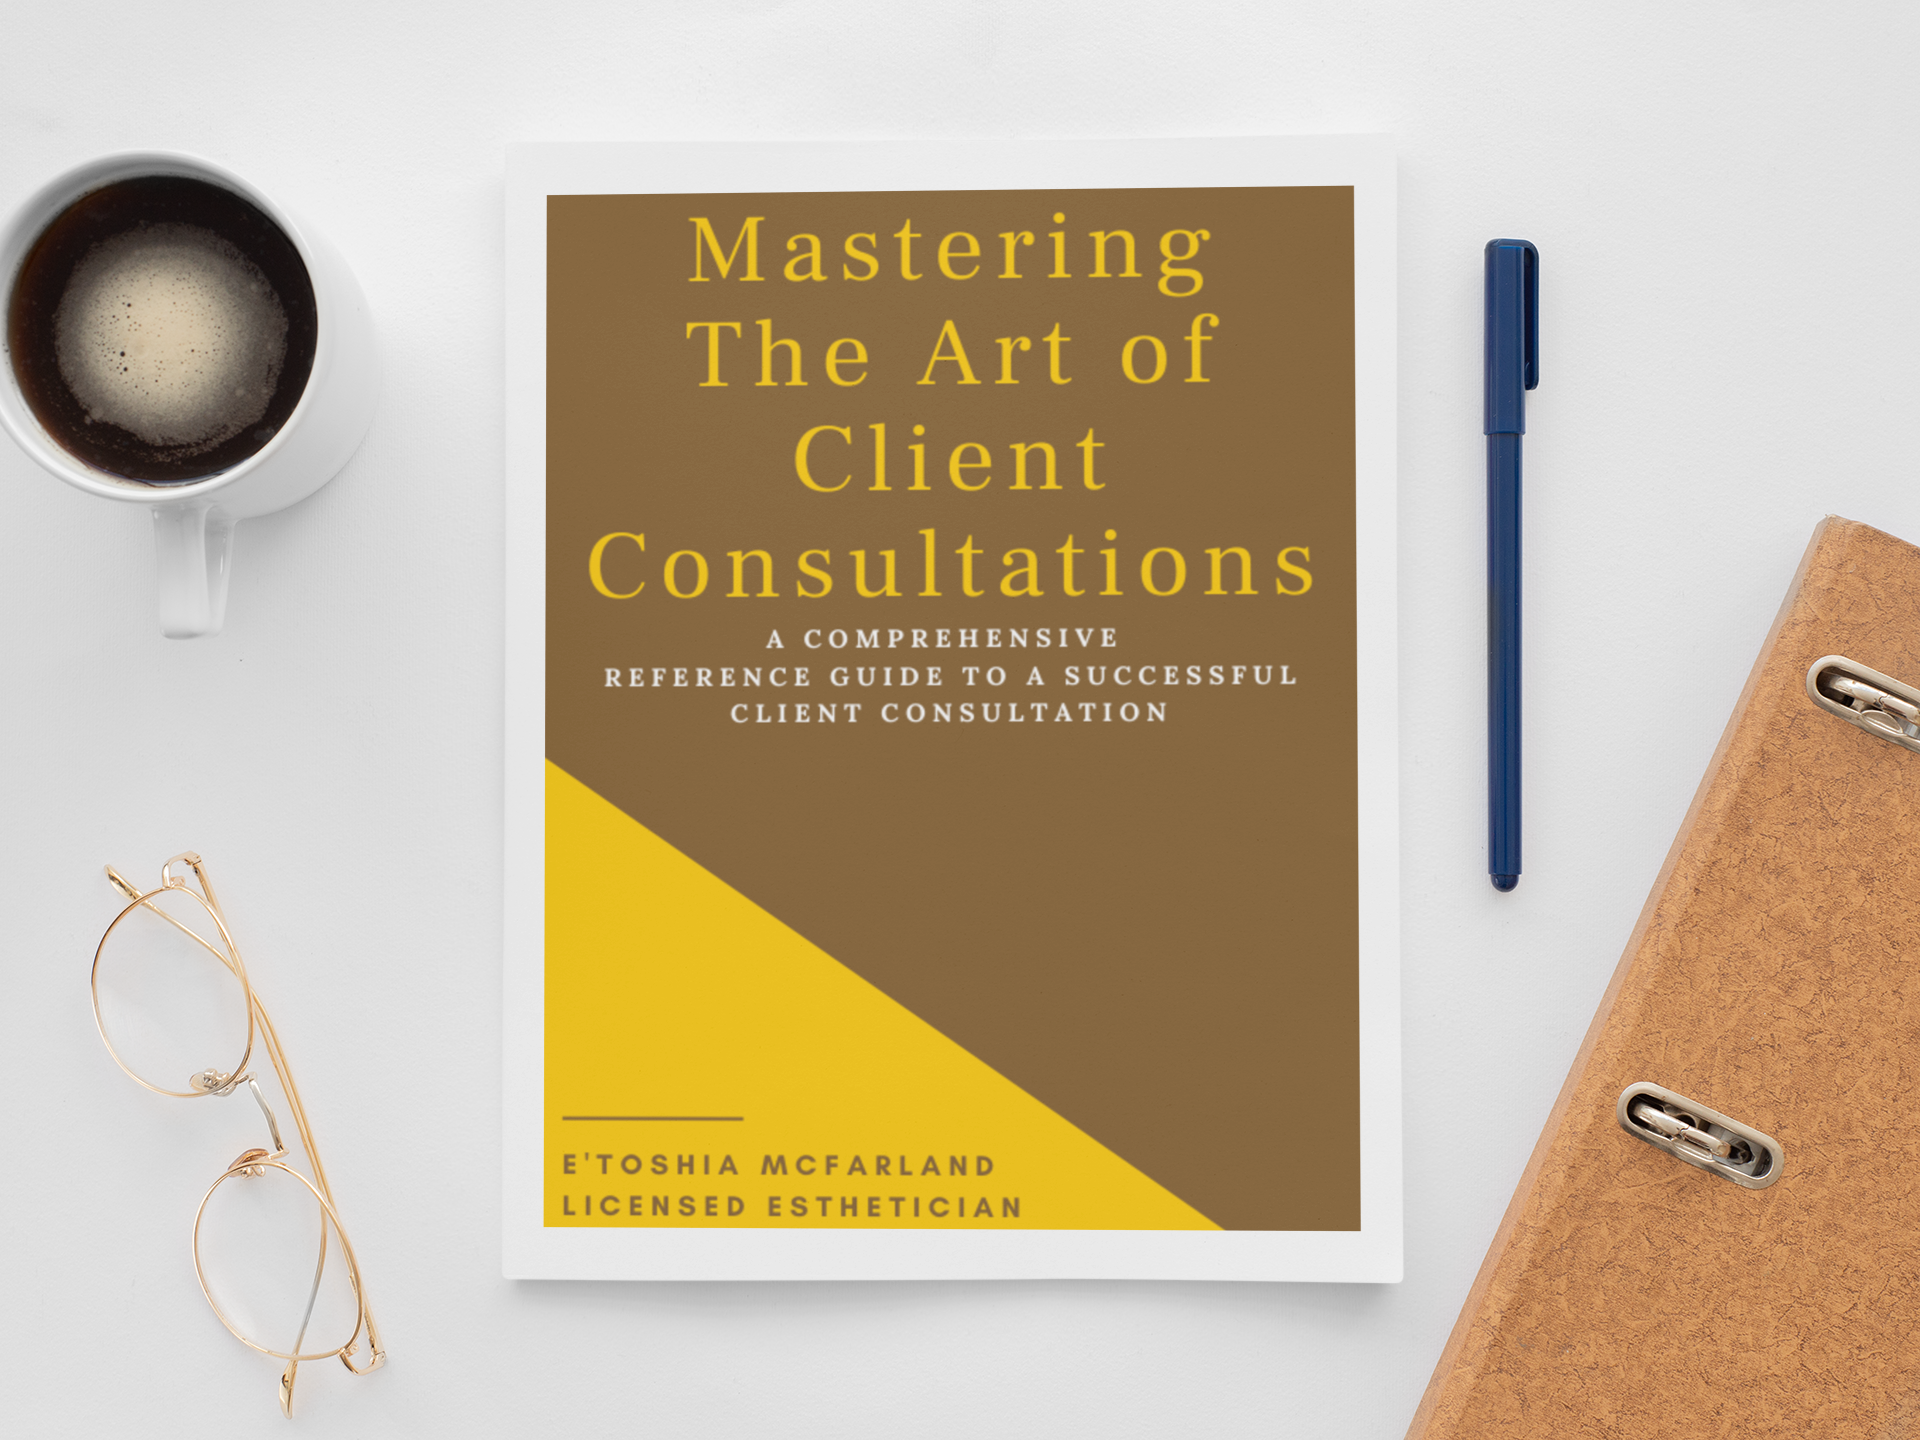 Mastering the Art of Client Consultations: E-book & Webinar Playback